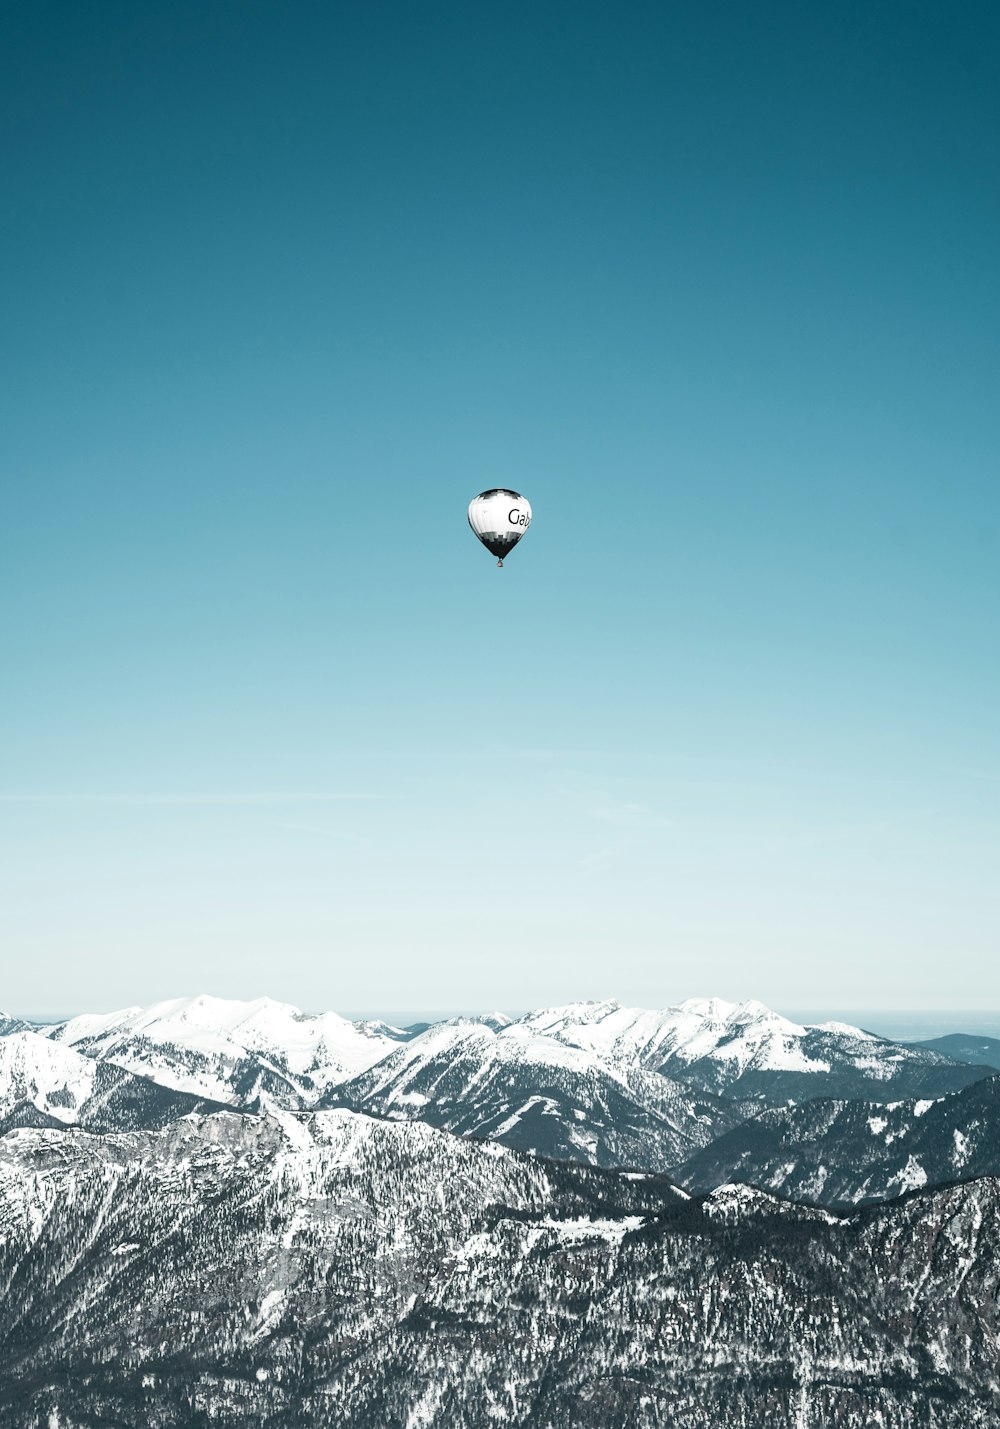 white and black hot air balloons in mid air